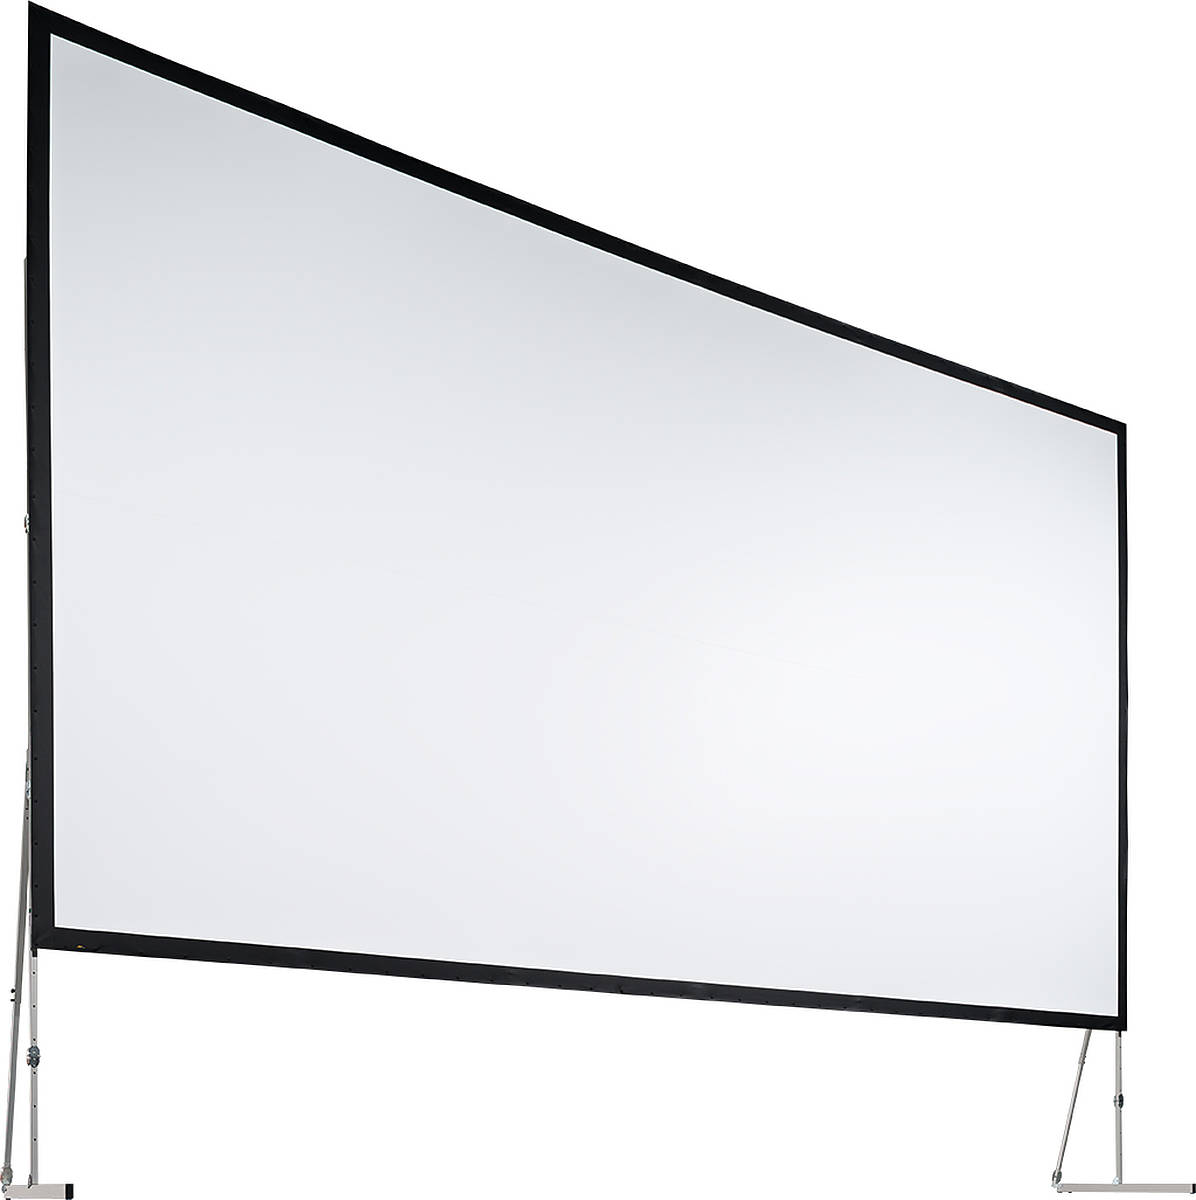 AV Stumpfl BXV-AW447/R10 198" (5.04m)
 16:10 aspect ratio projection screen product image. Click to enlarge.